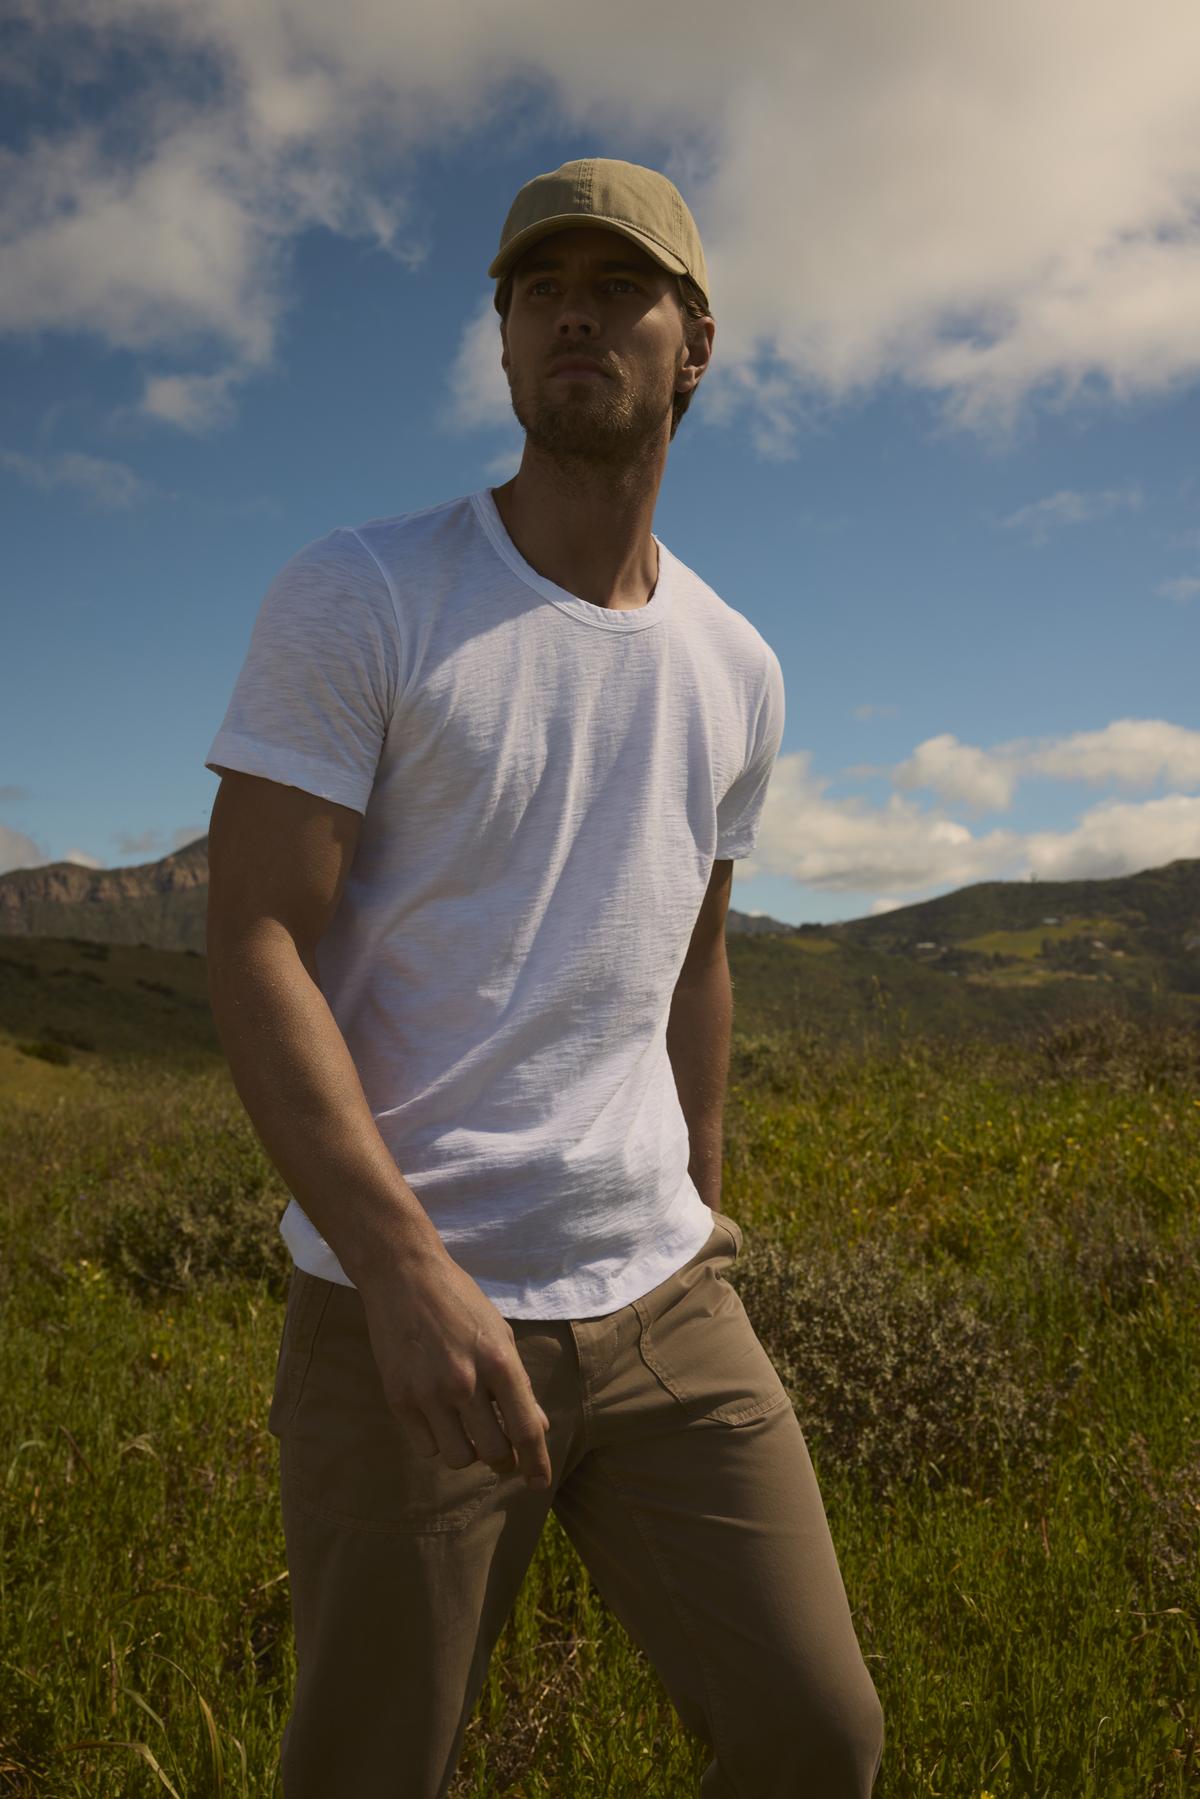 A man in a white Velvet by Graham & Spencer t-shirt and khaki pants stands in a field with a picturesque, cloudy sky above and mountains in the distance. He is wearing a tailored jacket and a cap, looking away.-36640161366209